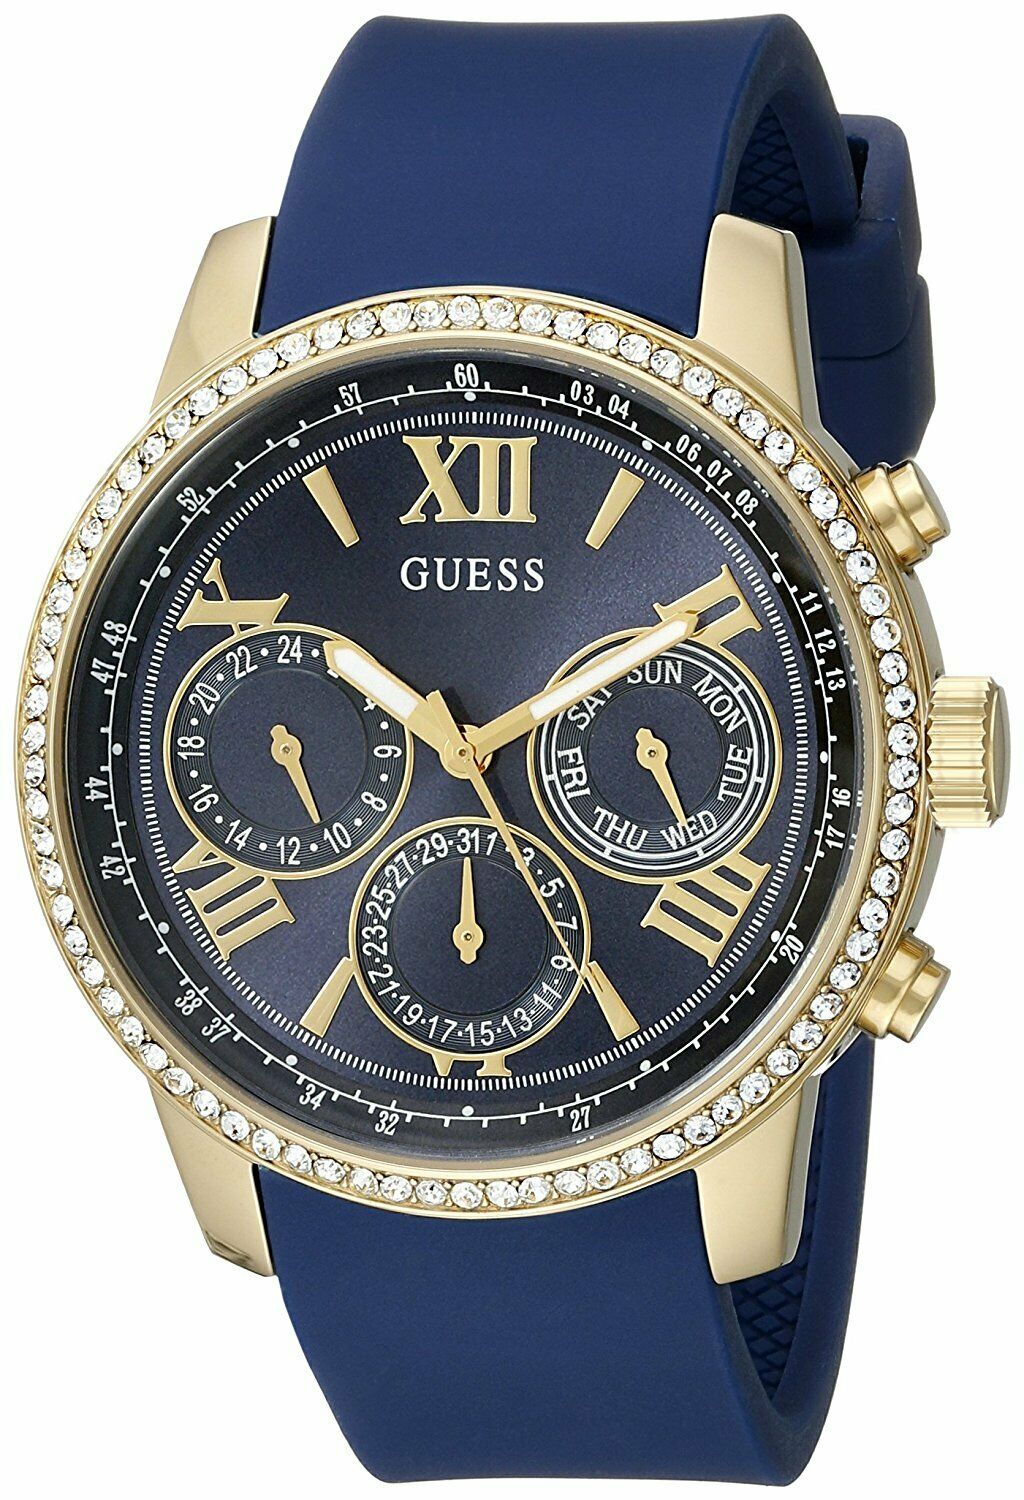 NEW Ladies Guess SUNRISE W0616L2/U0616L2 Stainless Steel Crystal Date Watch $216